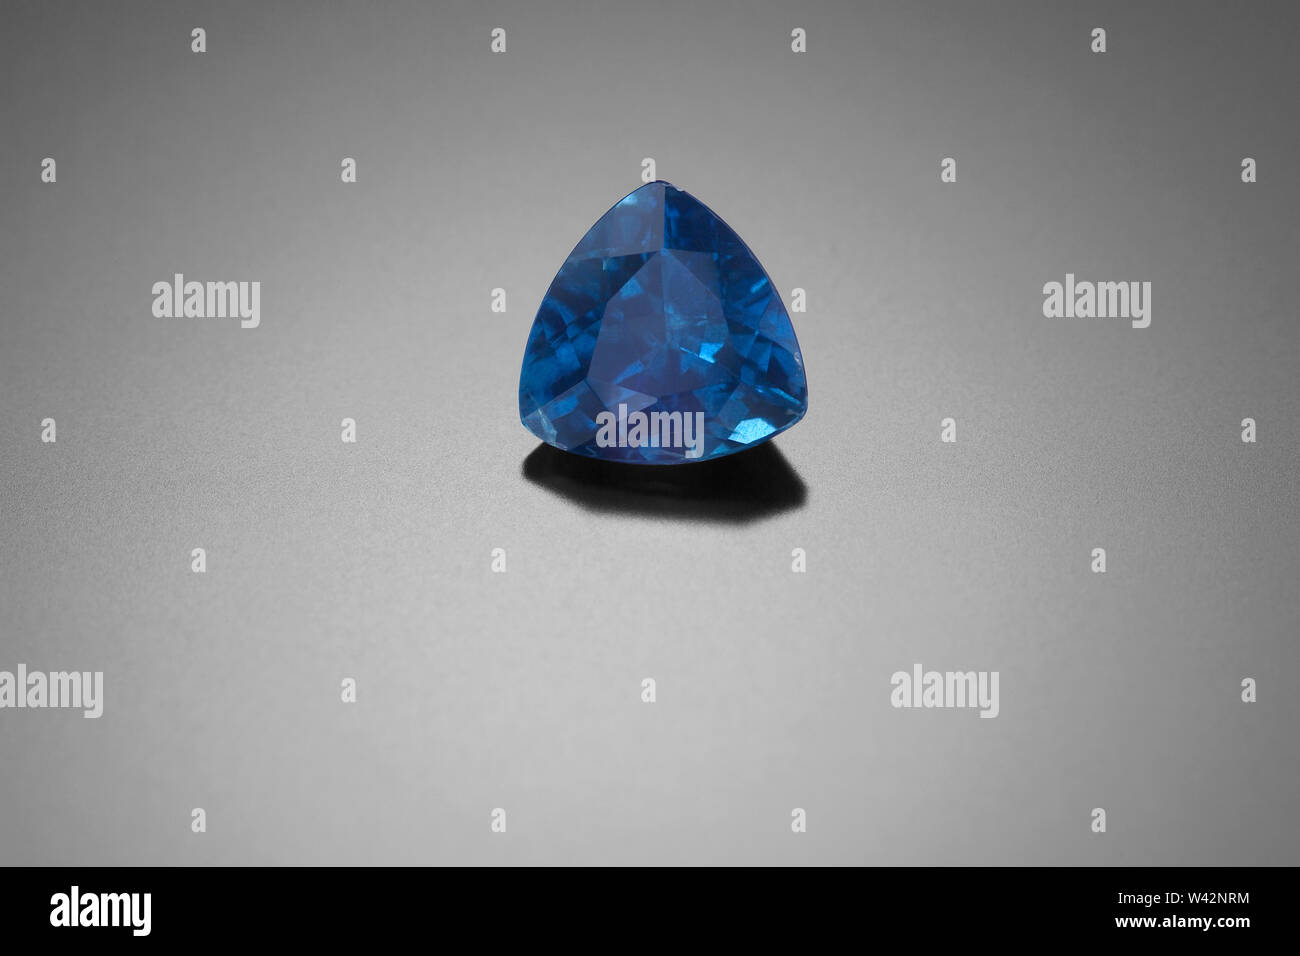 This faceted trillion cut sapphire sits on a black reflective background. Stock Photo